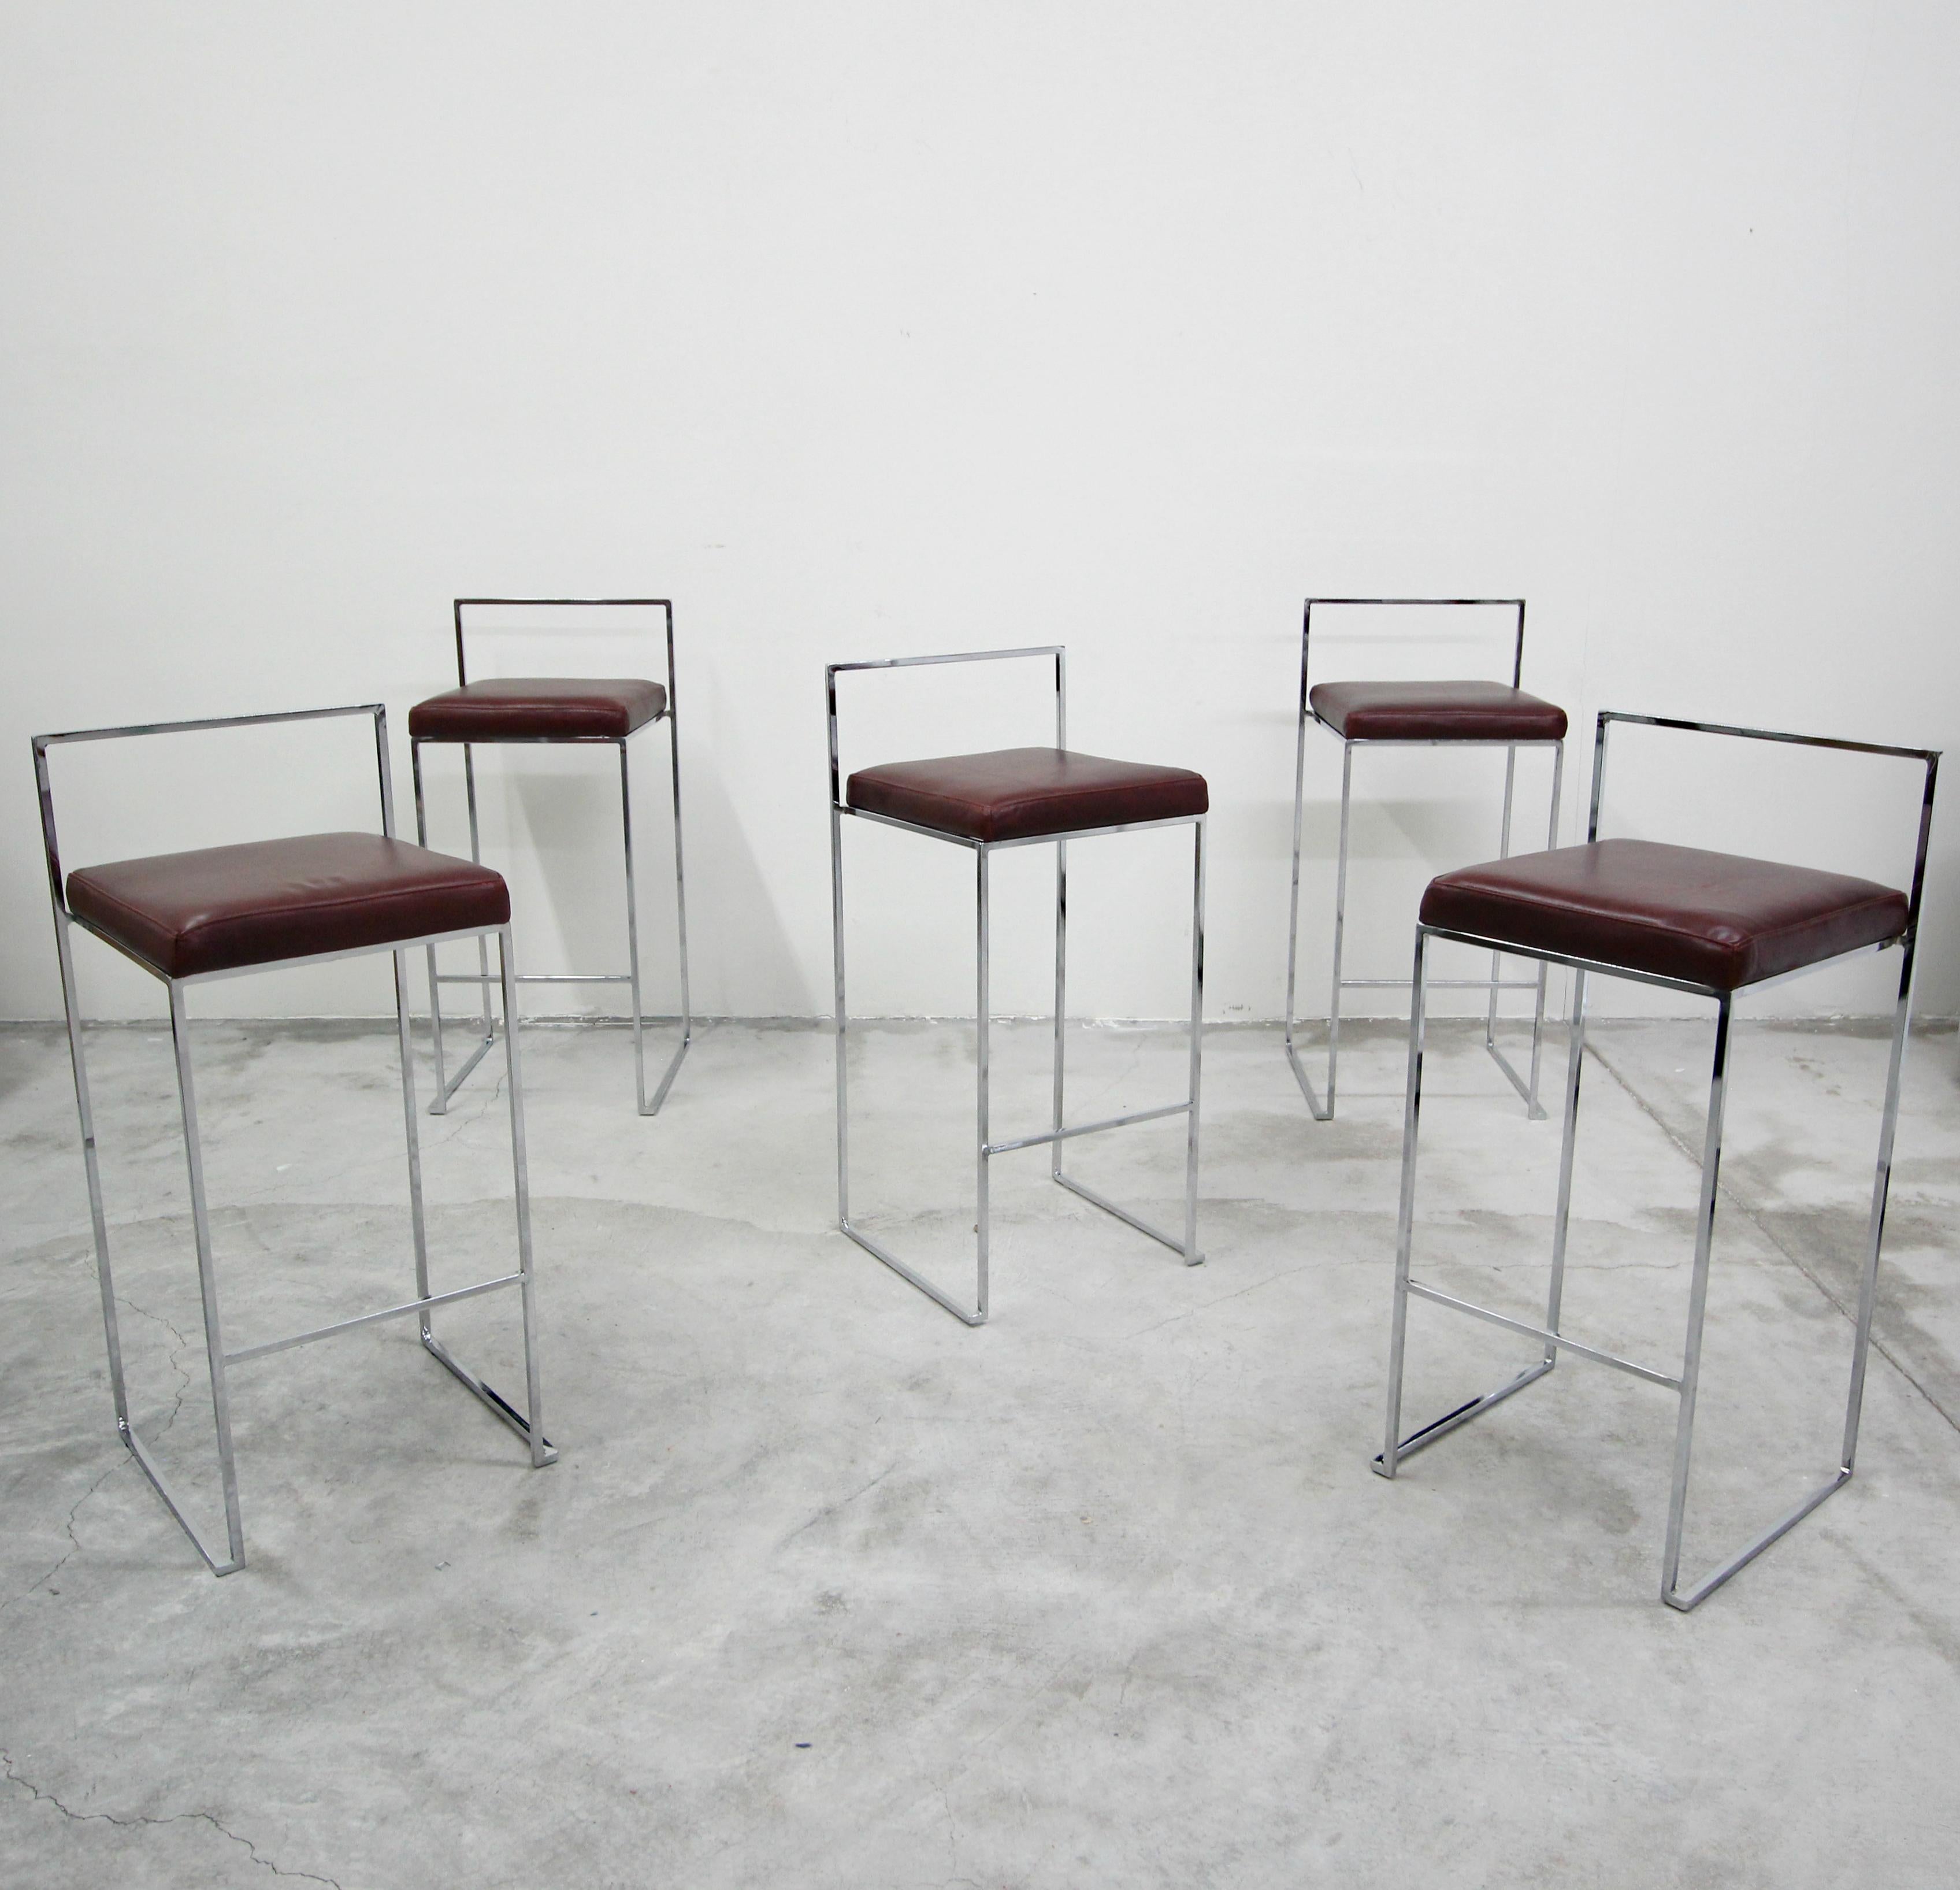 Set of five chrome, bar height stools by Milo Baughman. Stools have simple, thin, clean line chrome frames with all new butter soft maroon leather upholstery. They are in near mint condition and ready for their new home.